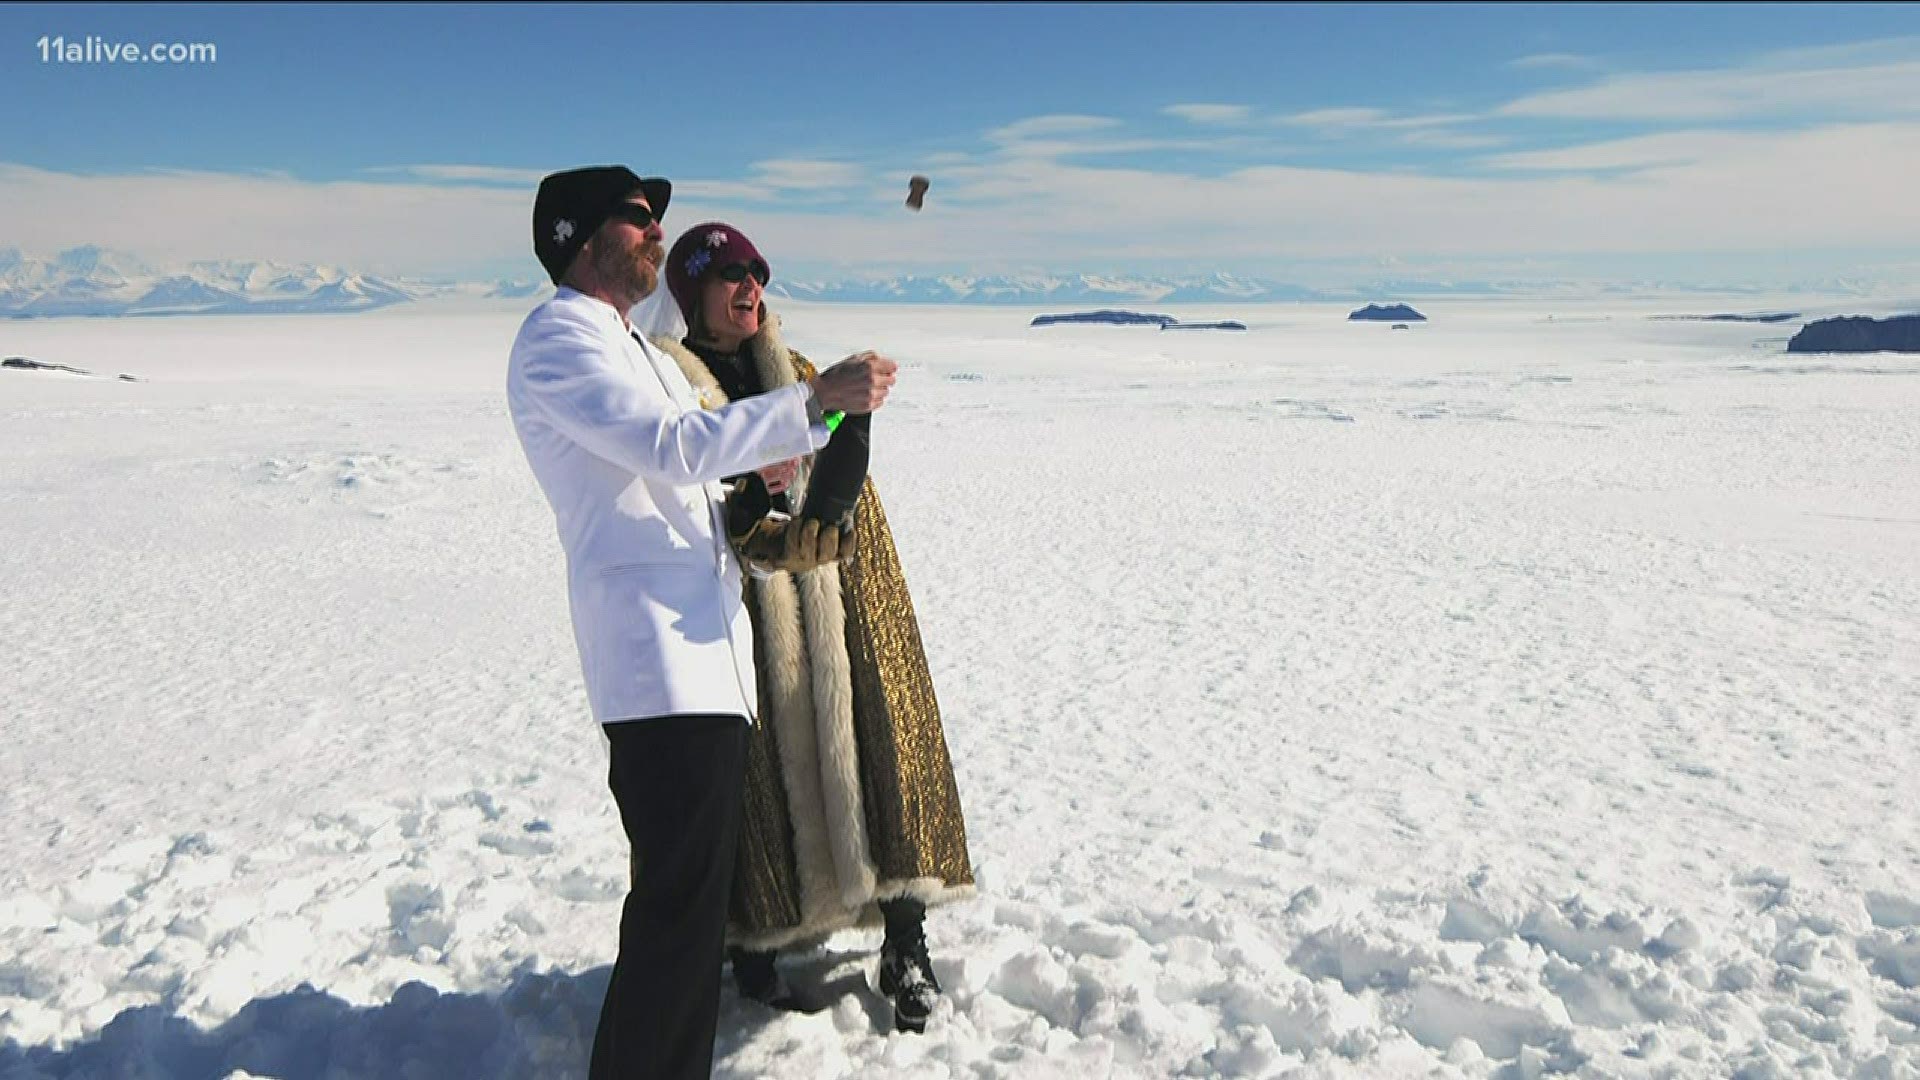 DJ was only supposed to be in Antarctica for 2 months, but as COVID-19 quickly spread, the couple decided he would stay there to keep working